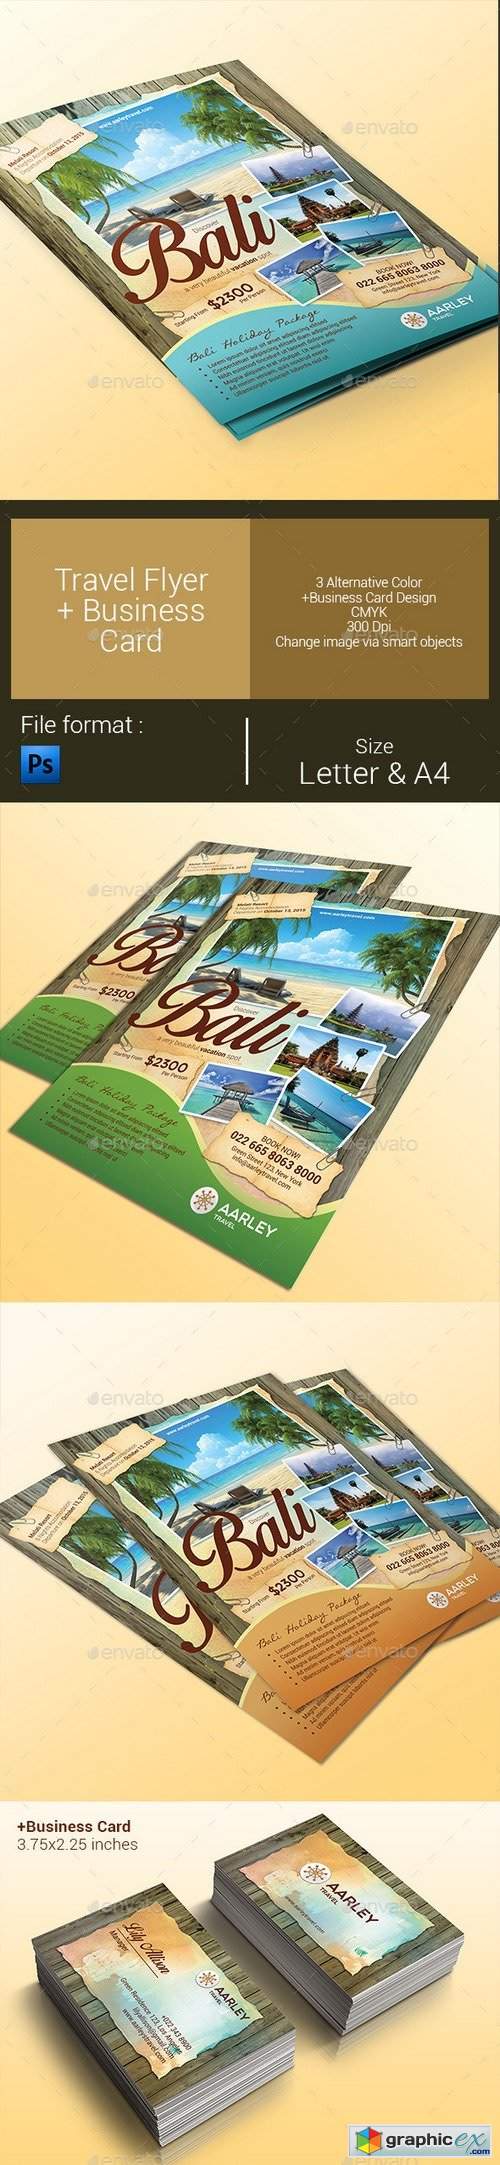 Travel Flyer + Business Card 9929864